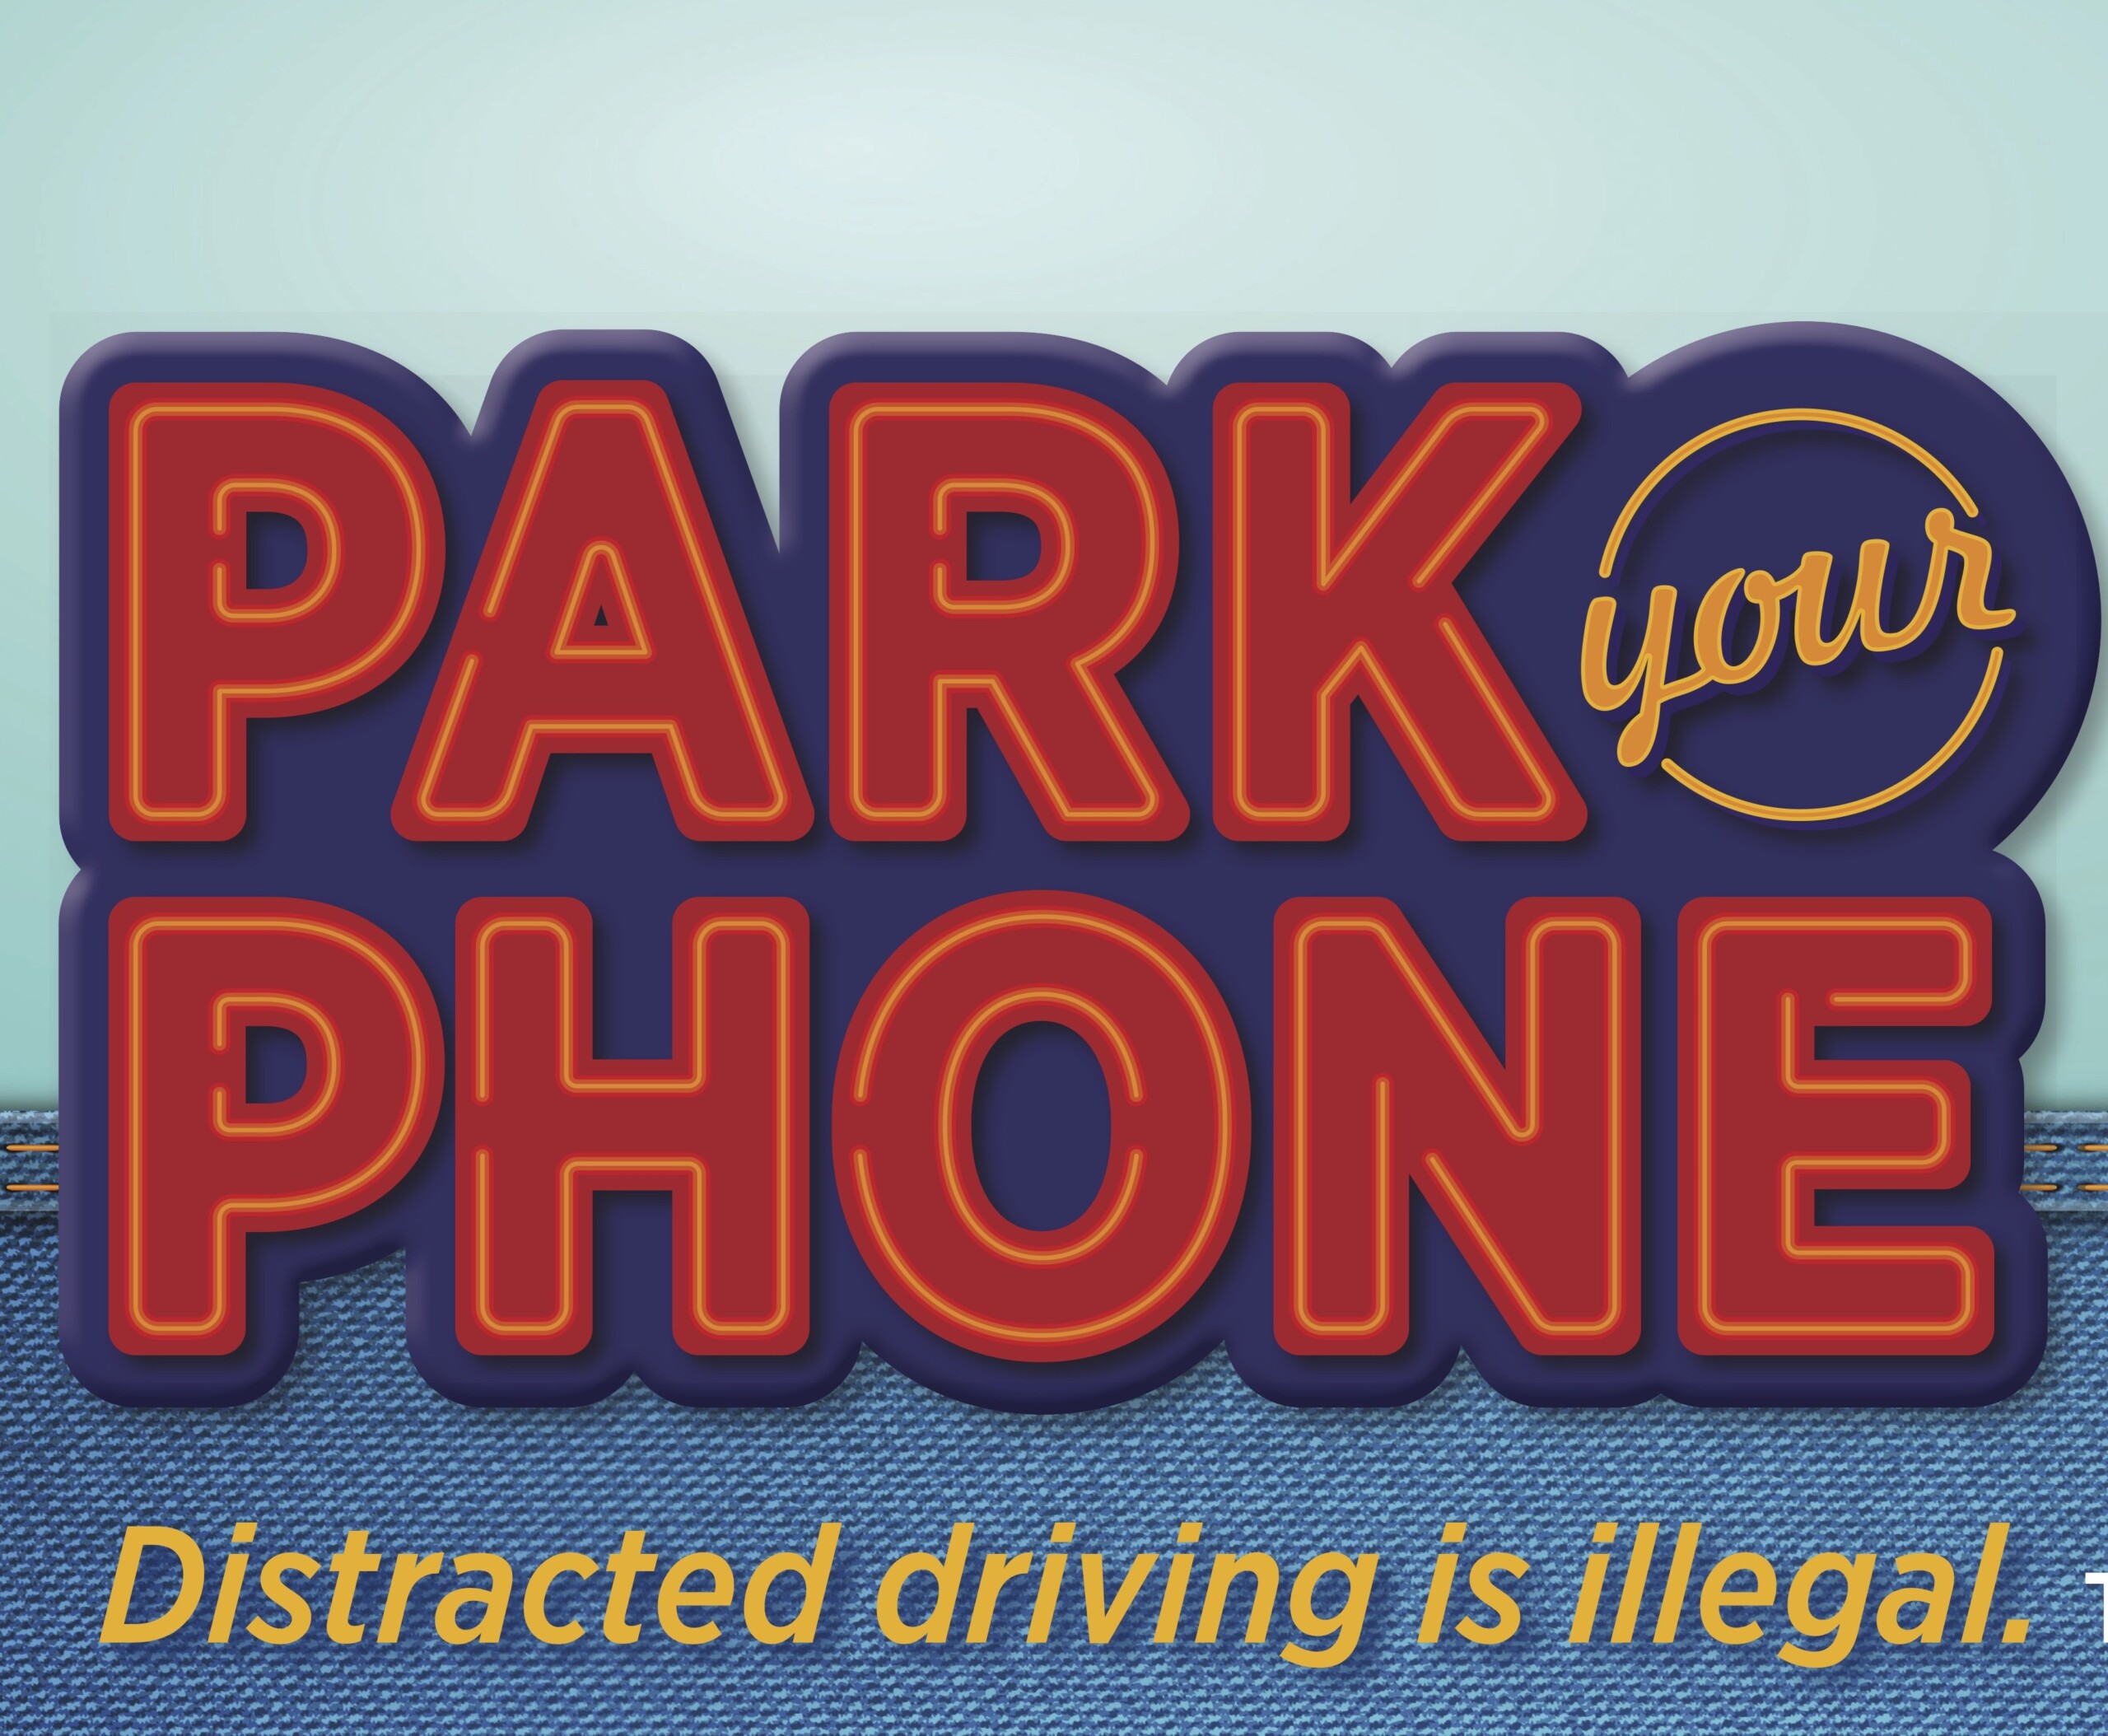 Park Your Phone campaign graphic.